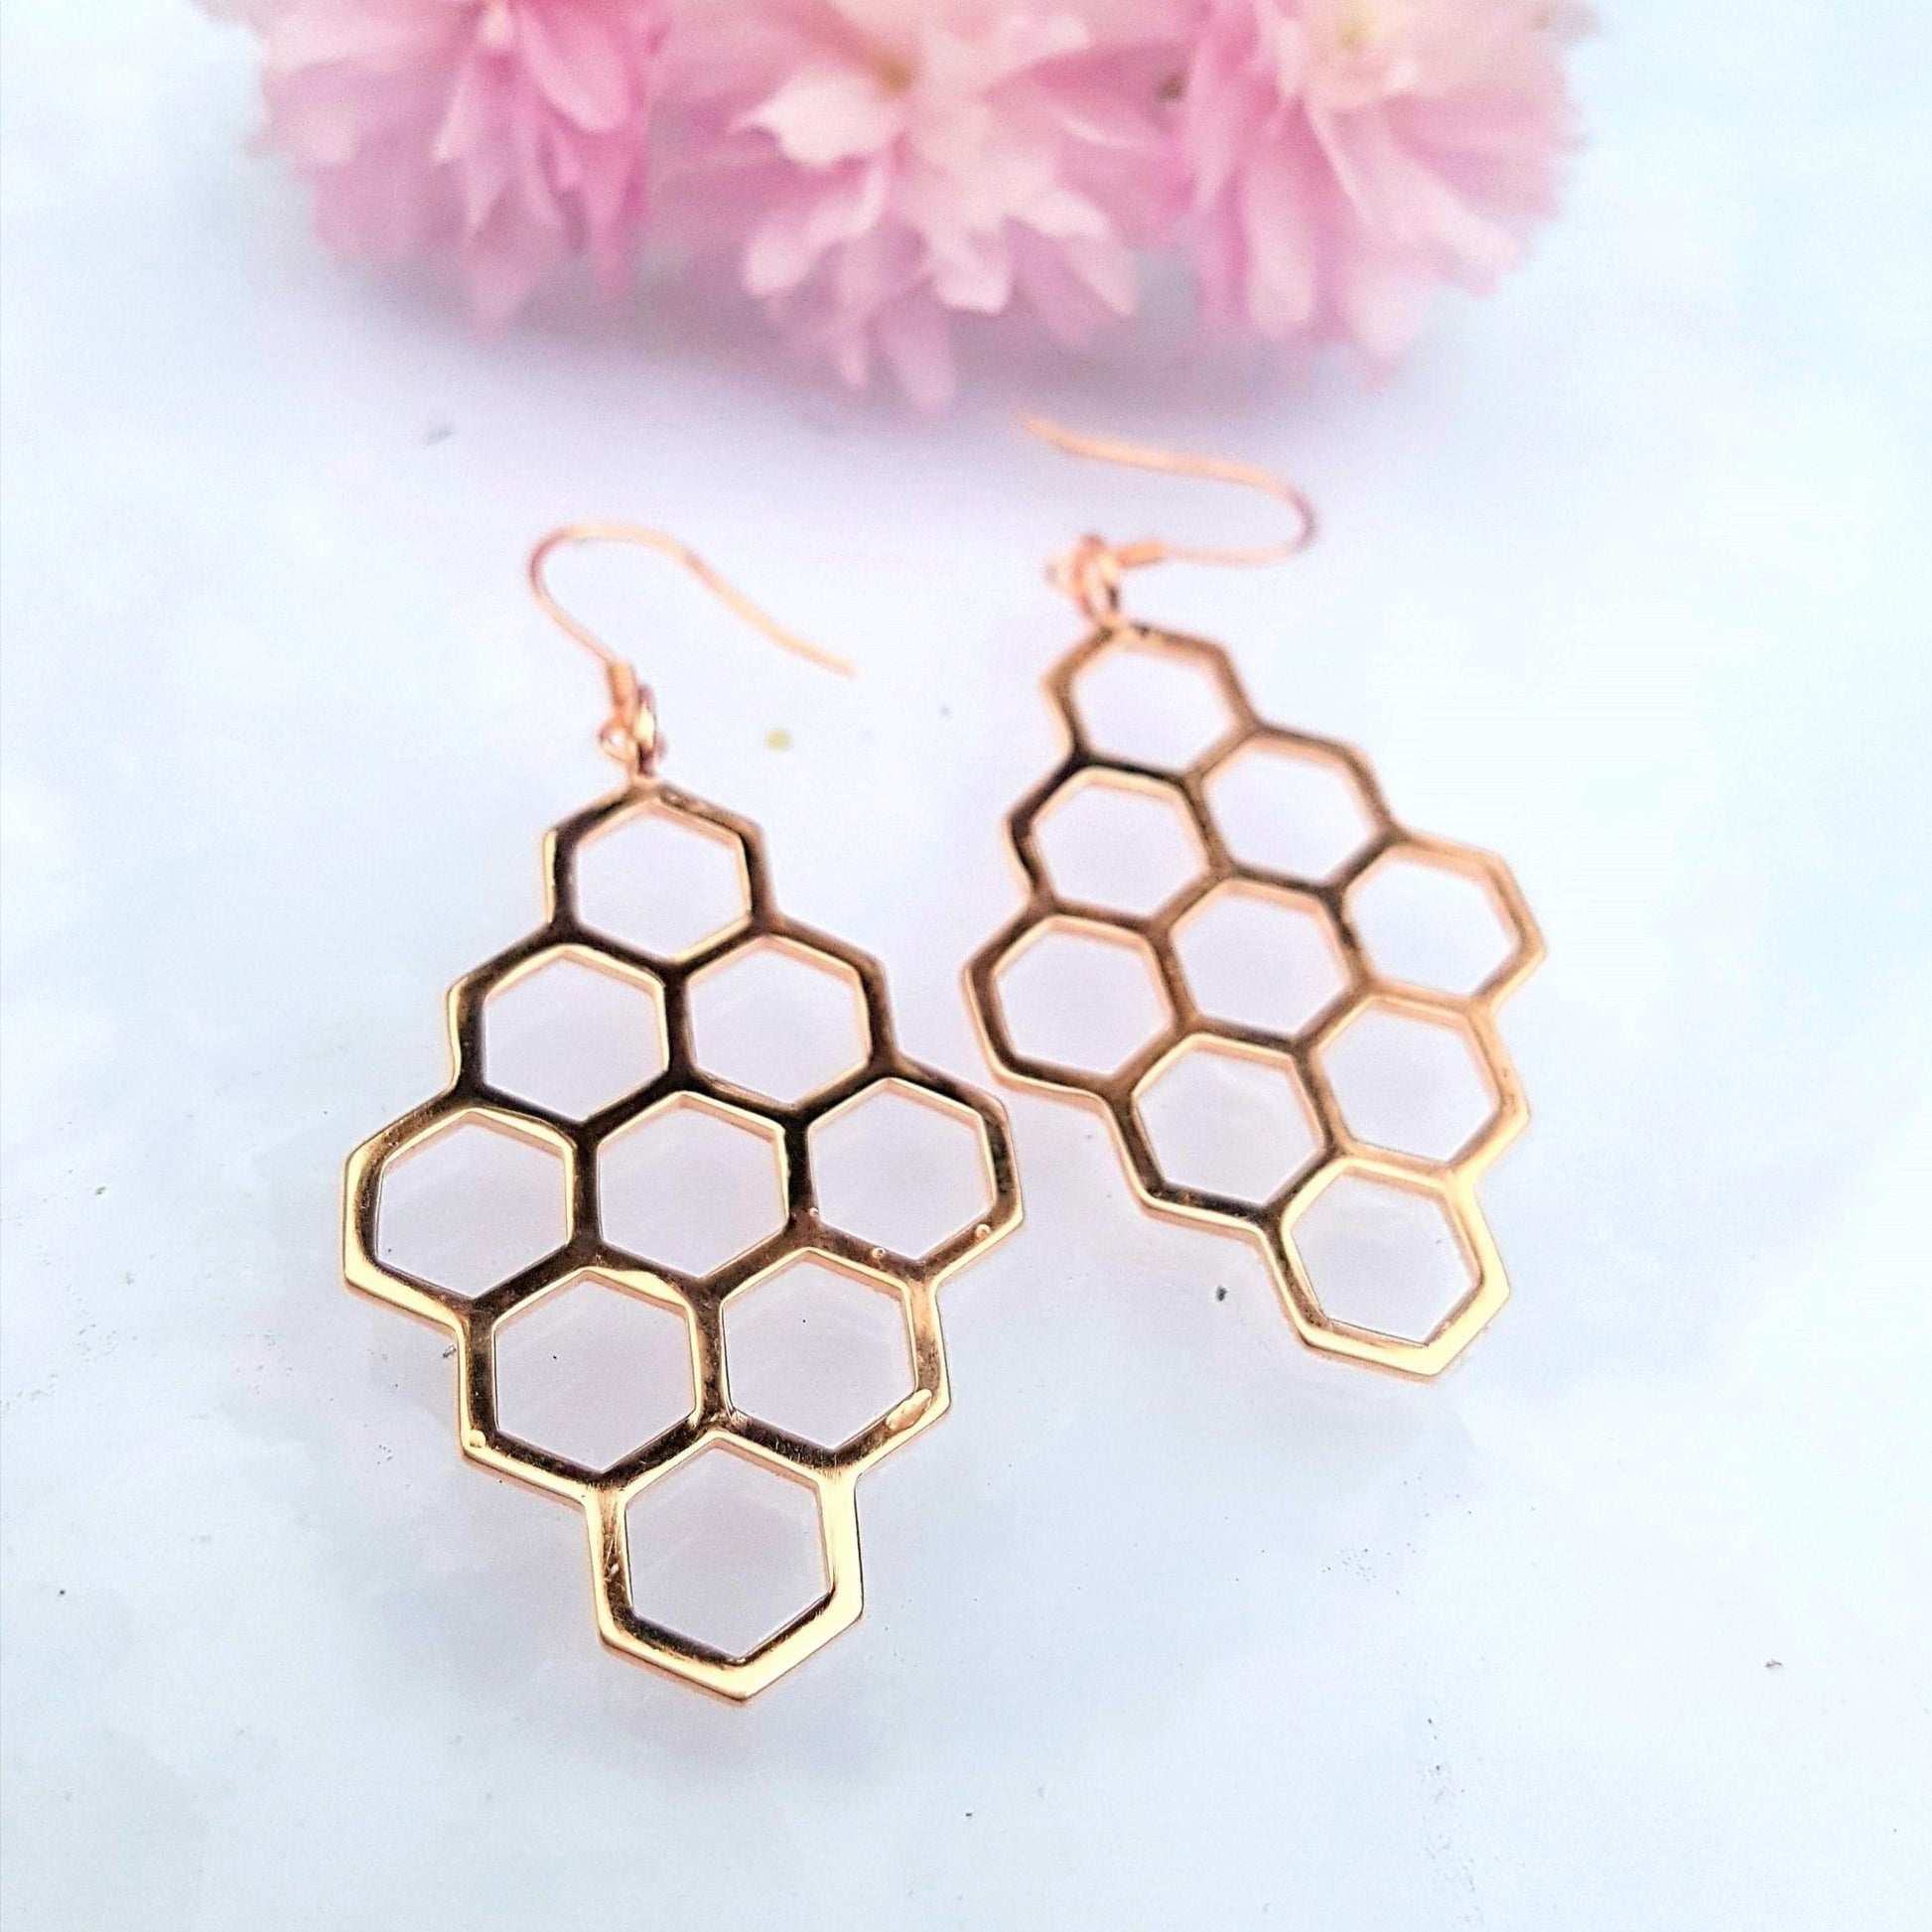 18k plated rose gold diamond shaped honeycomb earrings with light blue background and pink flower